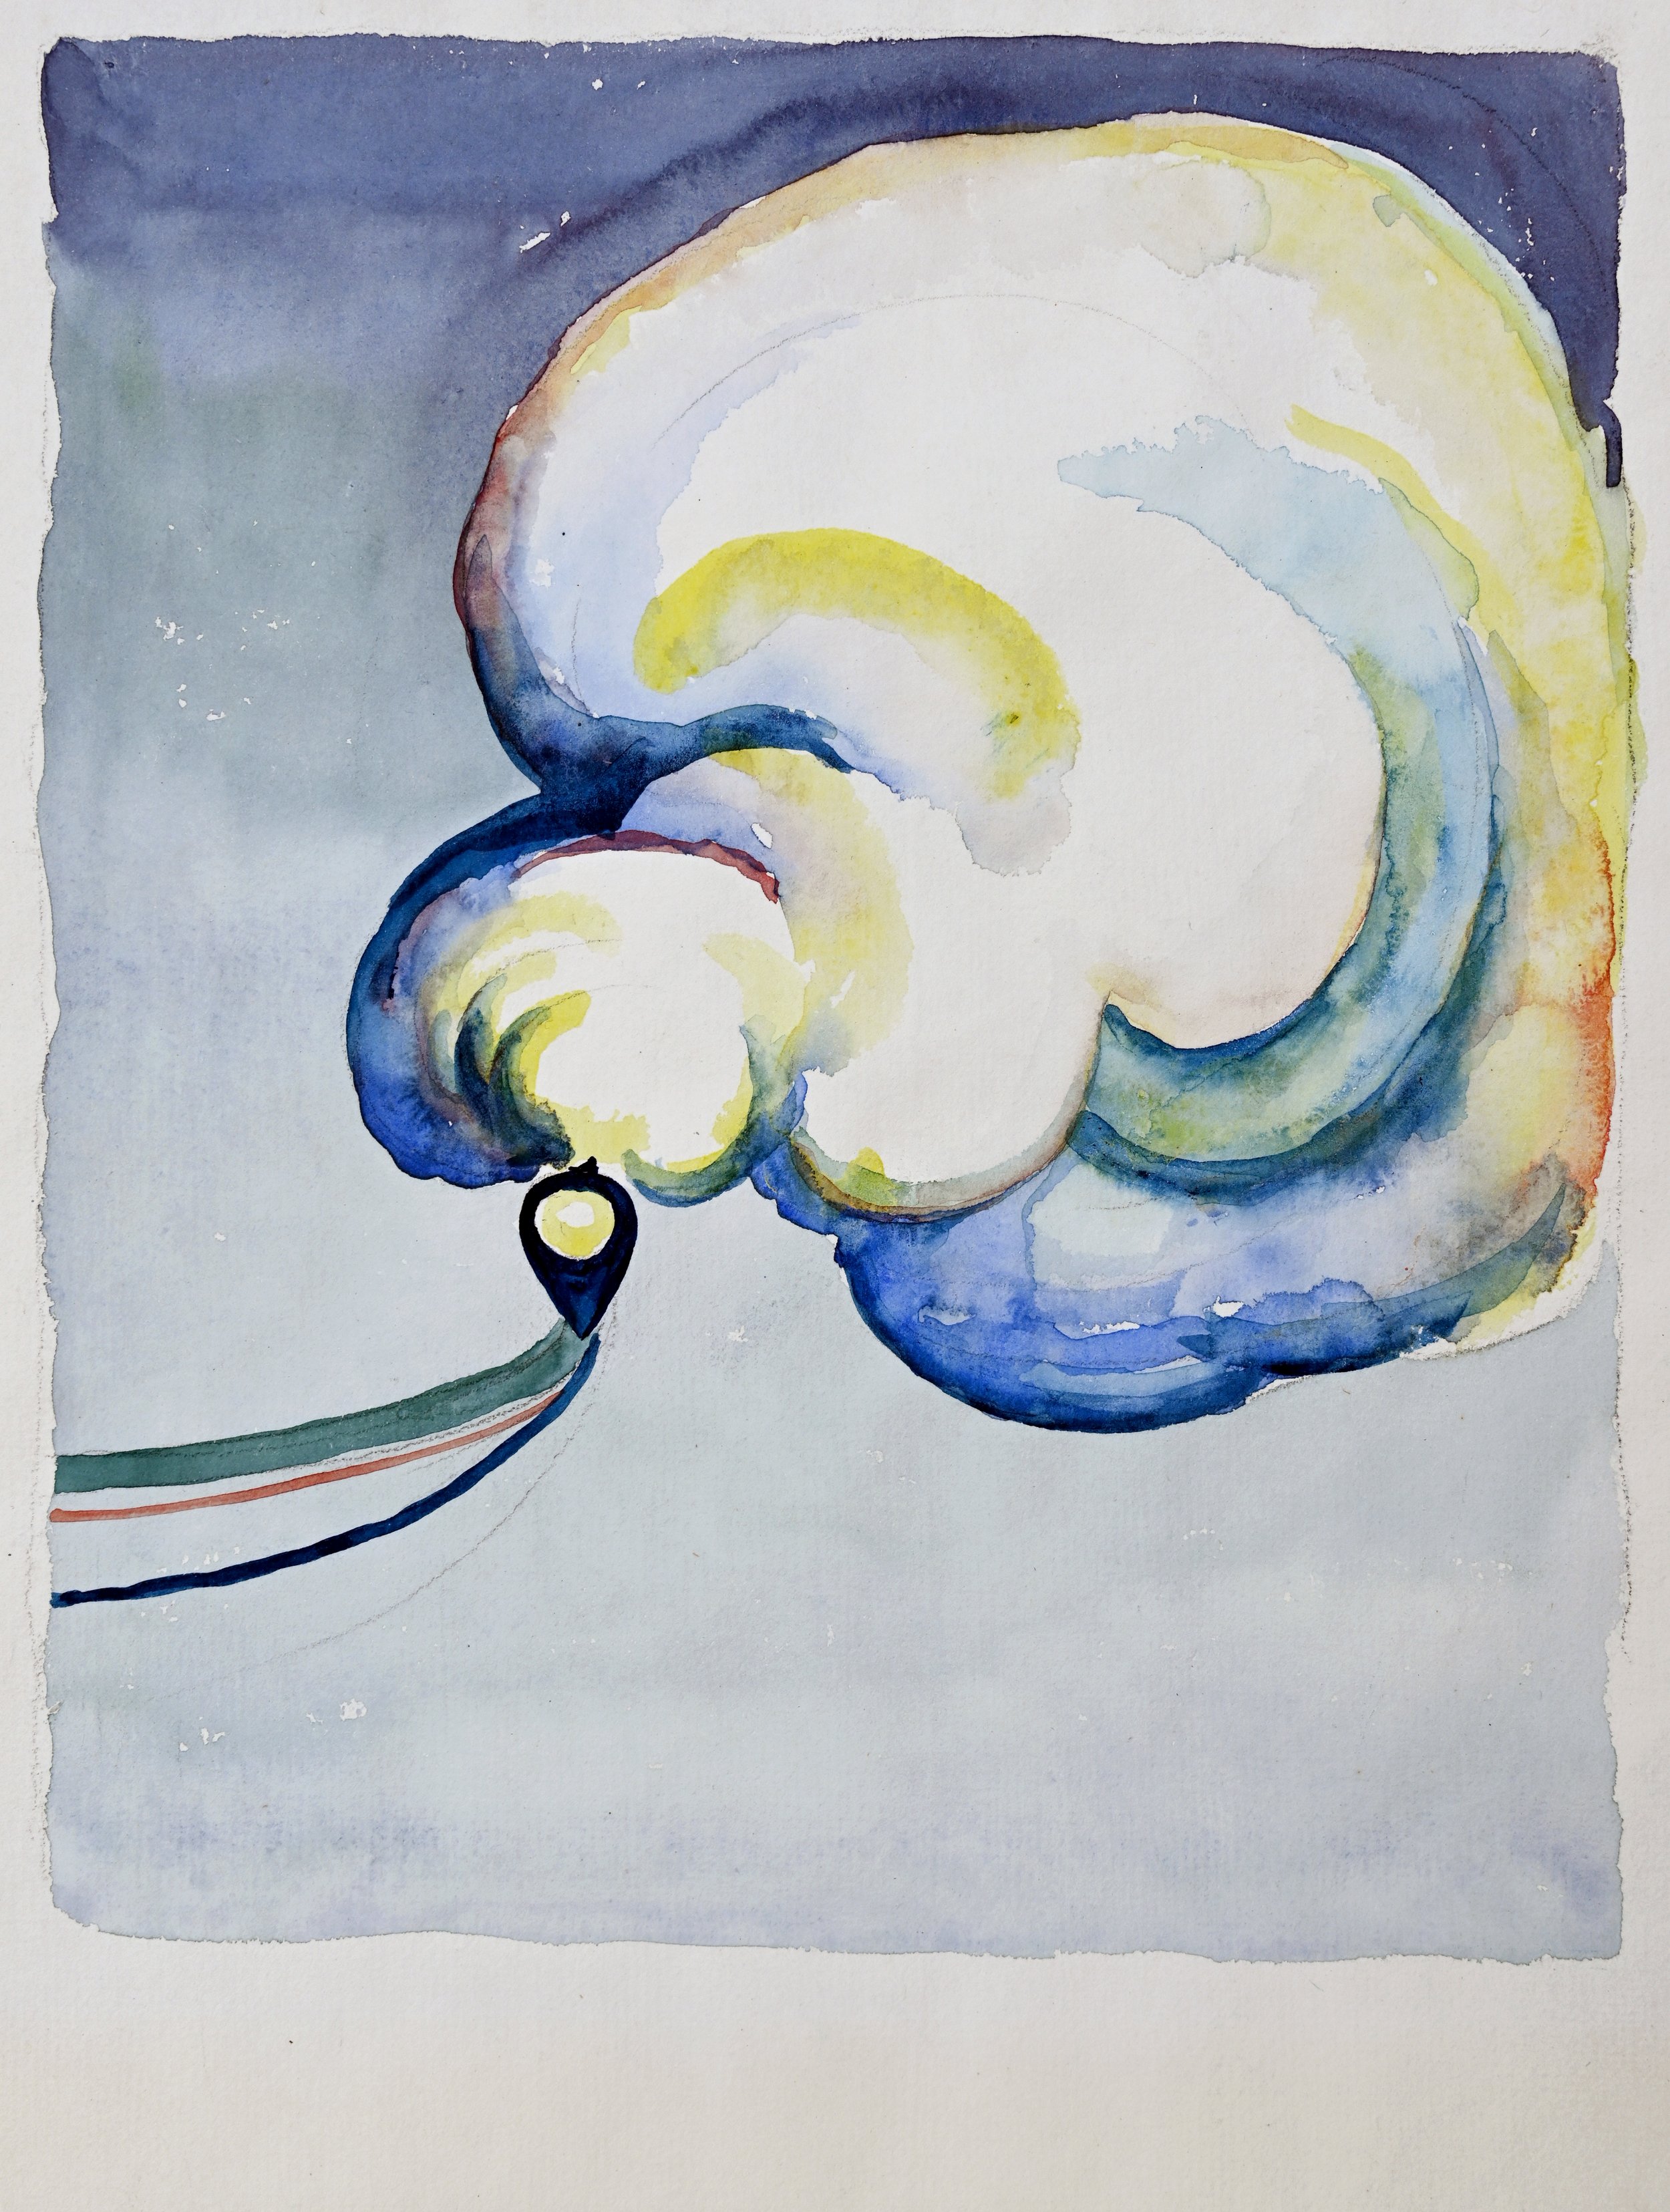   GEORGIA O’KEEFFE , (American, 1887-1986),  Train Coming in—Canyon, Texas , 1916, Watercolor on paper, 9 ¾ x 8 ¼ inches, Collection of the Amarillo Museum of Art, Purchased with funds from the National Endowment for the Arts, Amarillo Area Foundatio